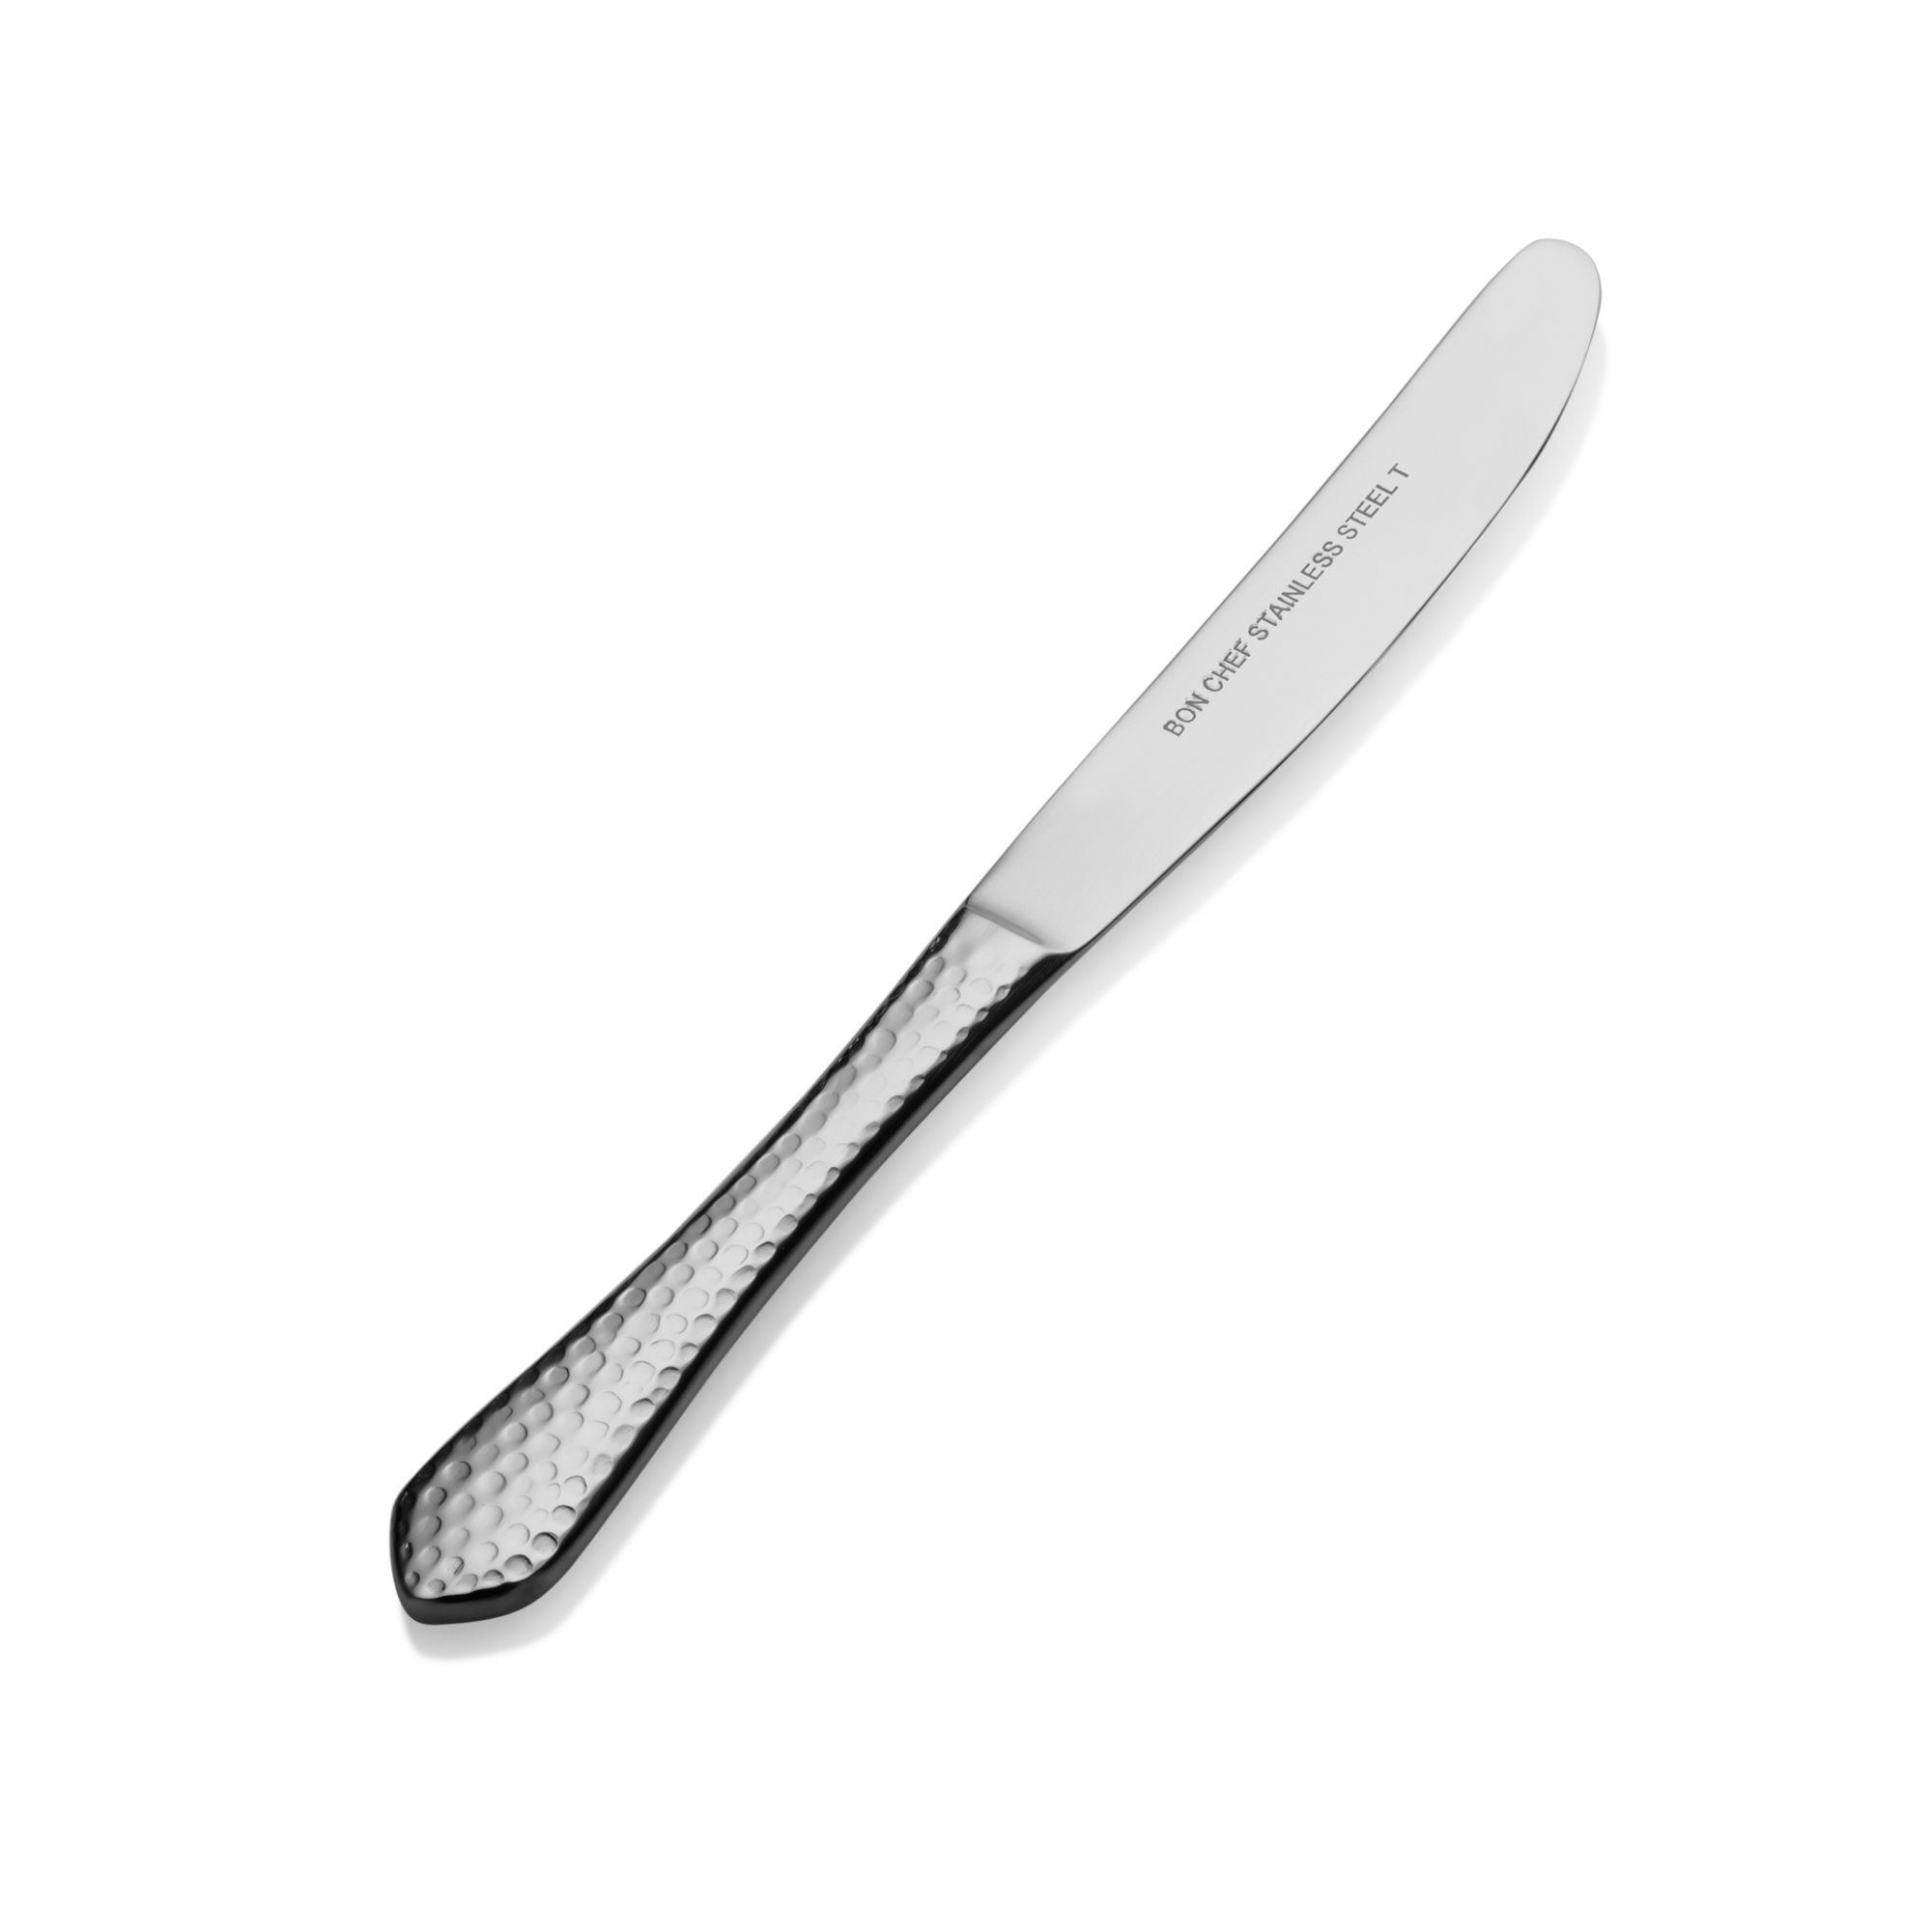 Bon Chef S1217 Reflections 18/8 Stainless Steel European Solid Handle Butter Knife